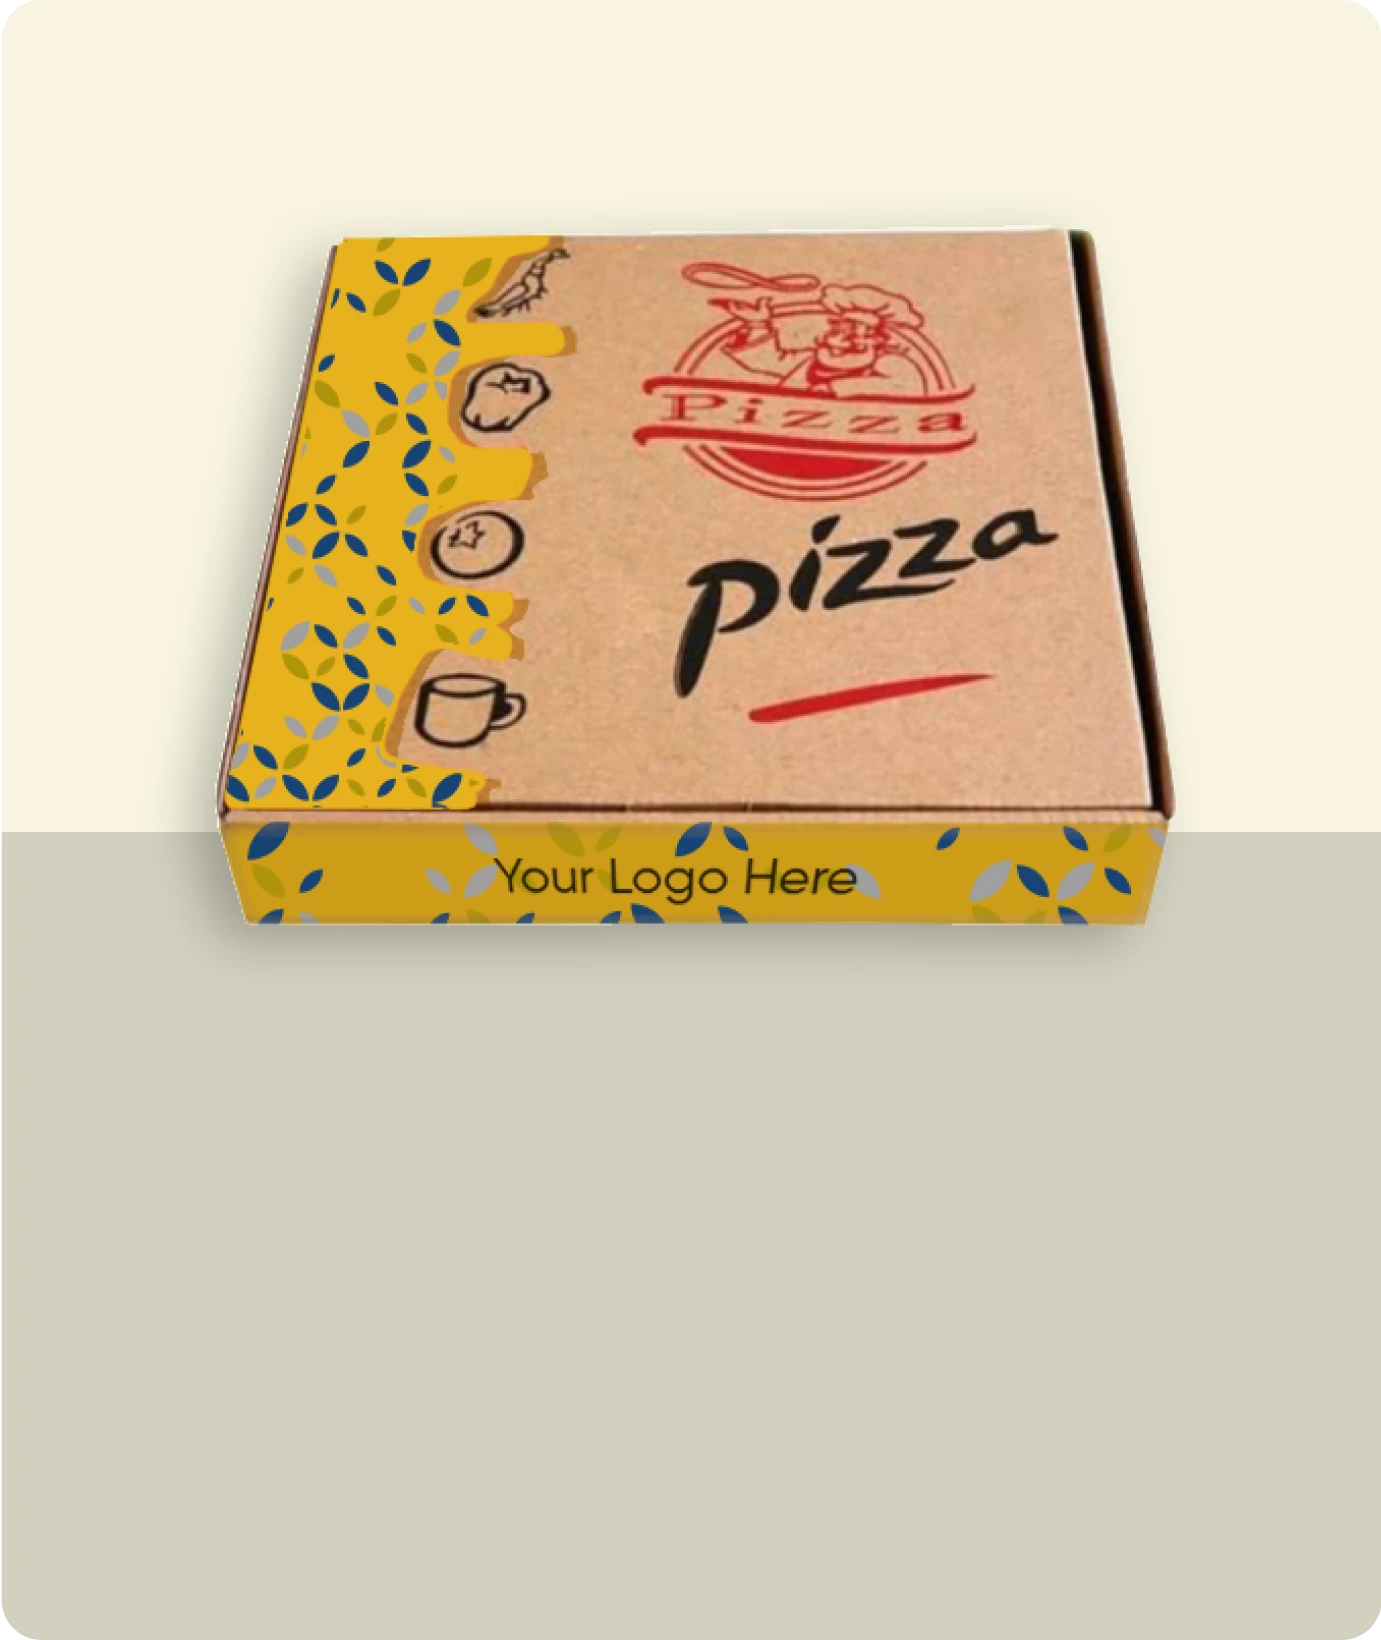 Corrugated Pizza Boxes related products image | The Box Lane